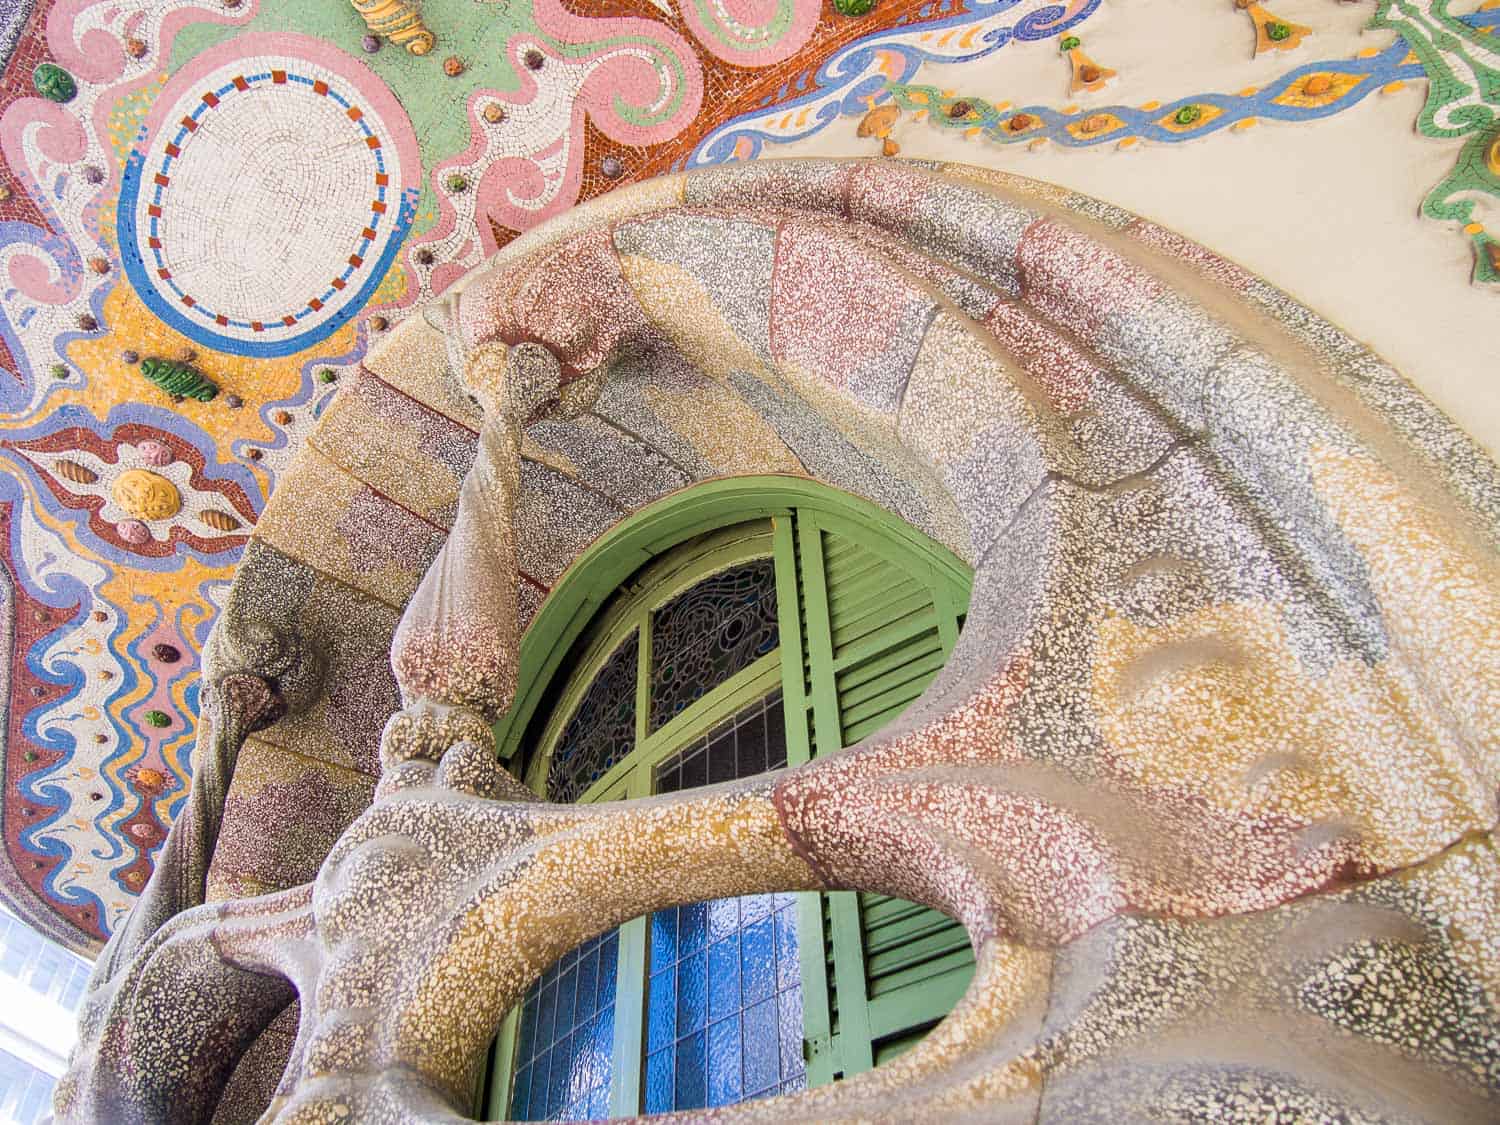 Ornately decorated window frame of Casa Comalat in Barcelona